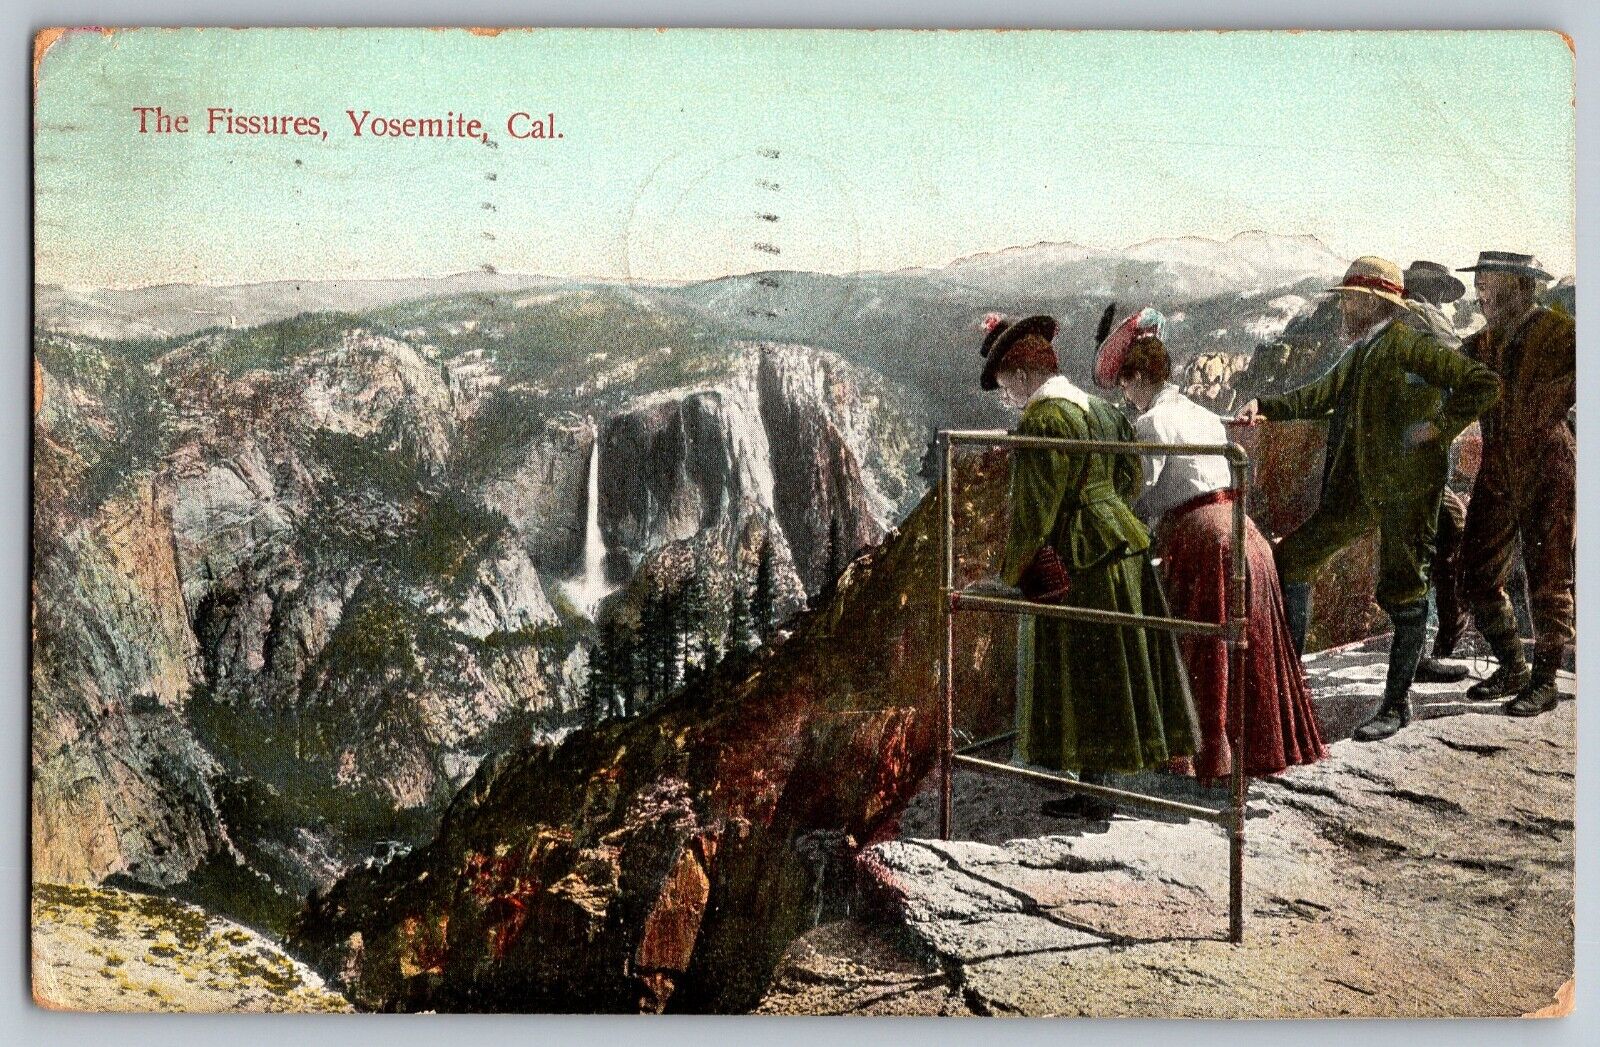 Yosemite, California CA - The Fissures - Vintage Postcard - Posted 1908